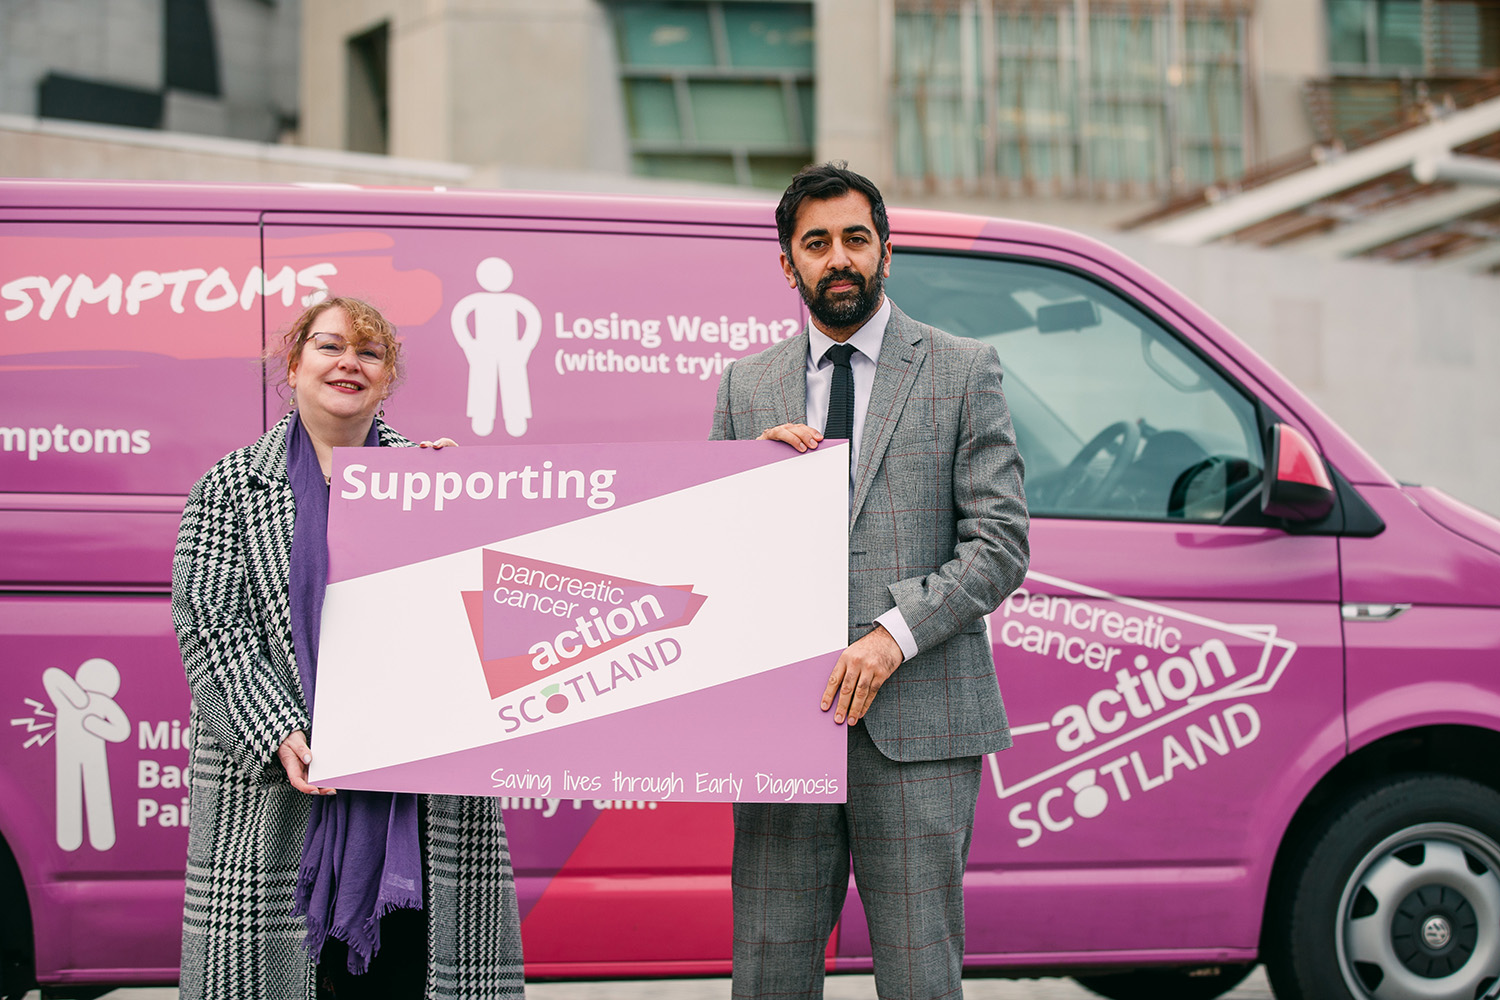 Humza Yousaf holding a PCAS sign.